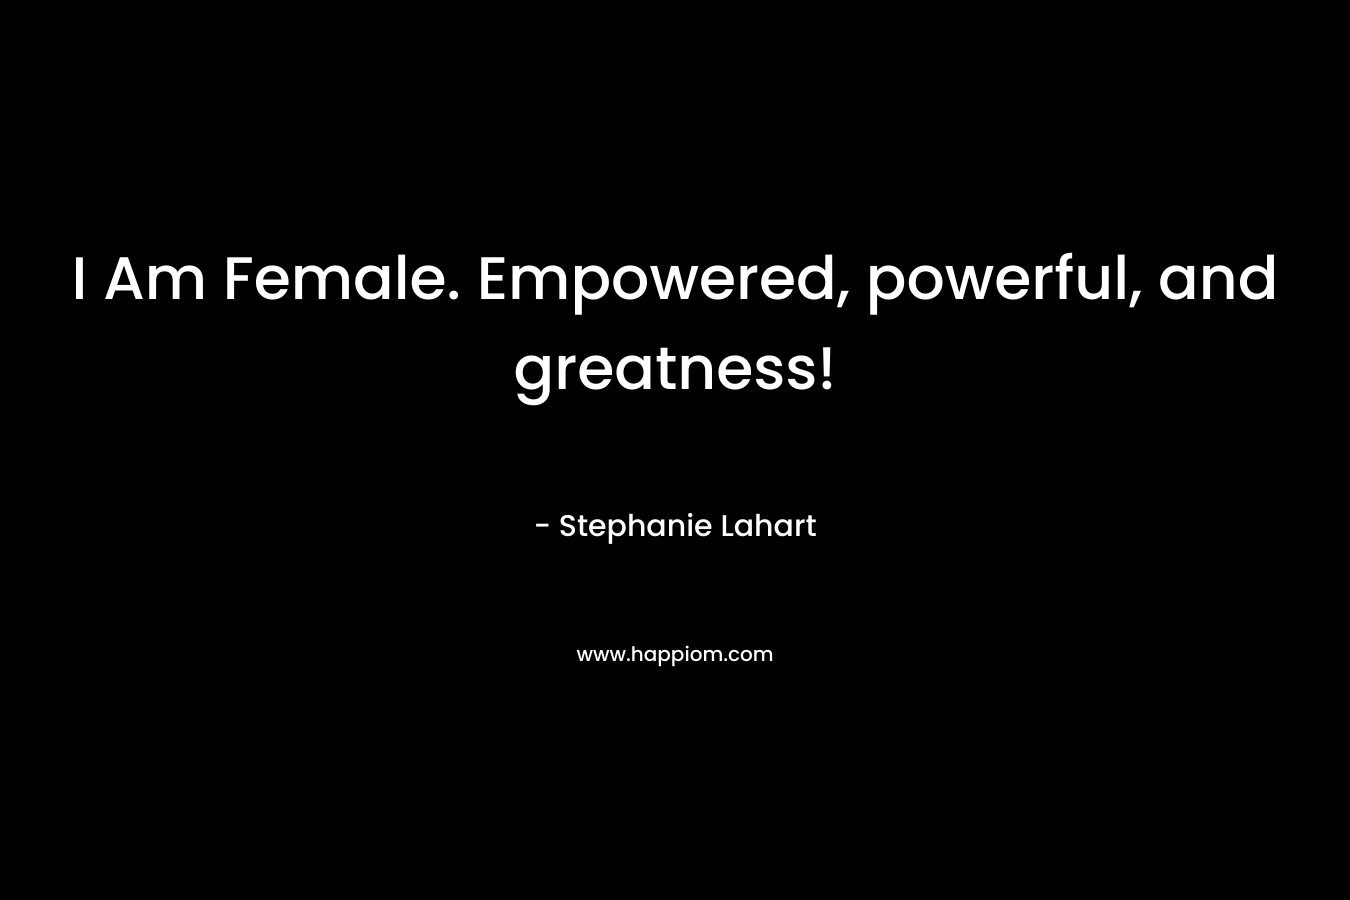 I Am Female. Empowered, powerful, and greatness!